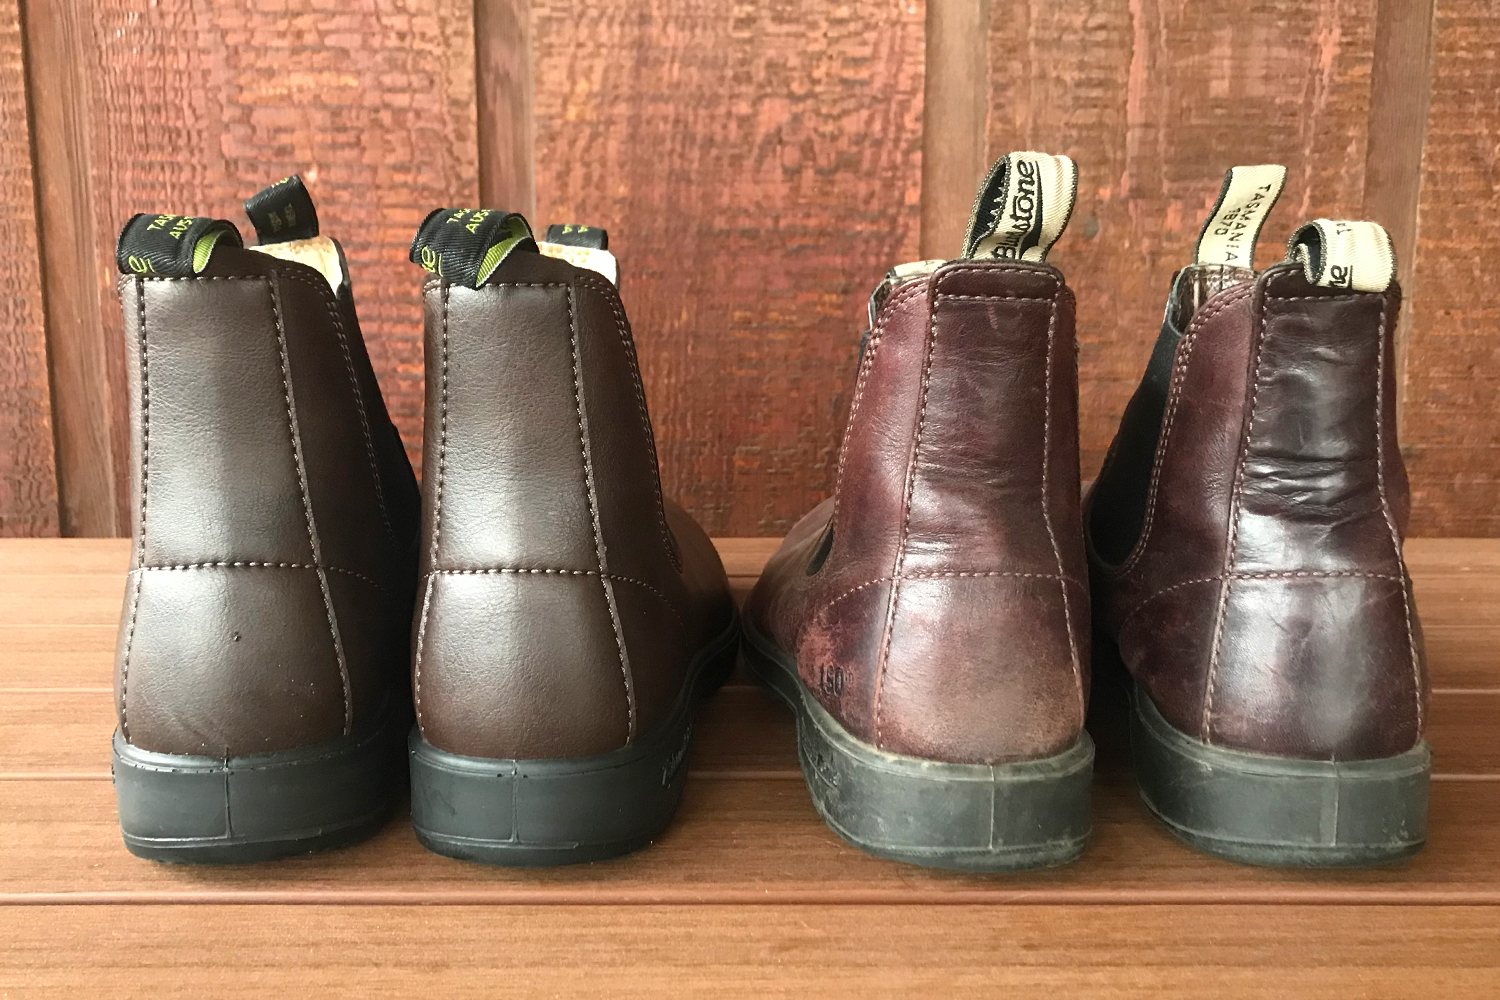 A pair of vegan #2116 Chelsea boots from Blundstone next to a pair of #150 leather boots from the Australian brand. We tested and reviewed the two pairs of men's boots.